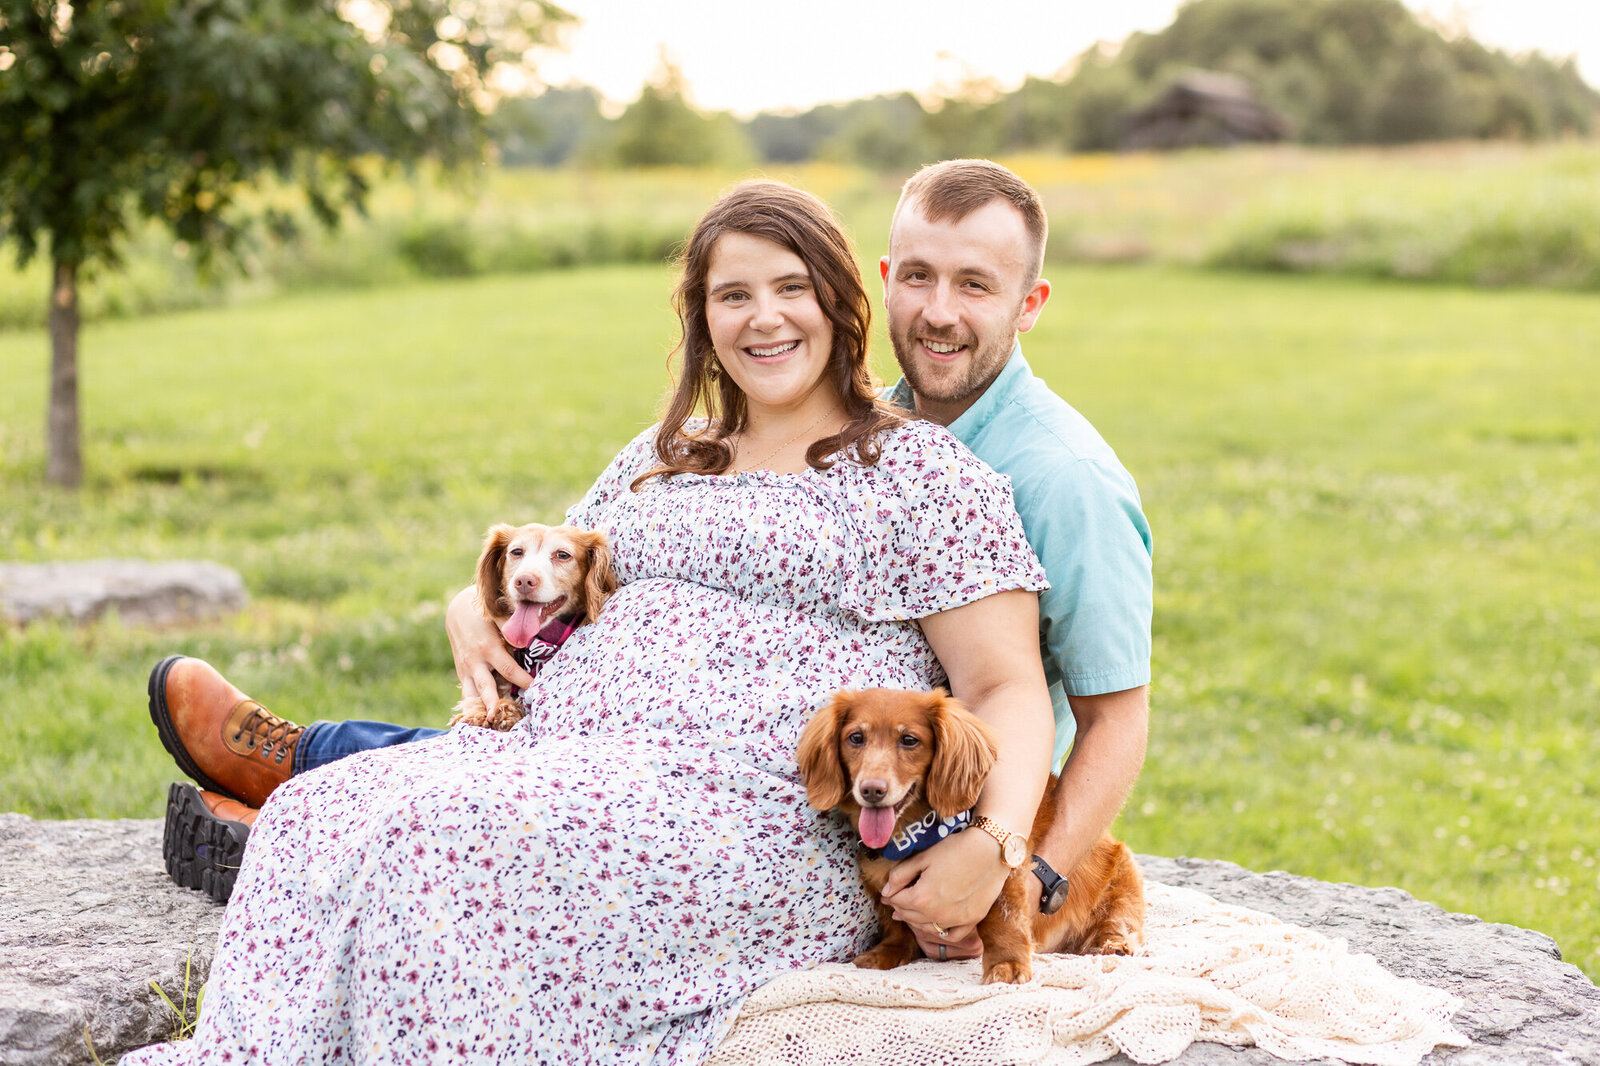 Outdoor-maternity-photography-session-golden-hour-Frankfort-KY-2